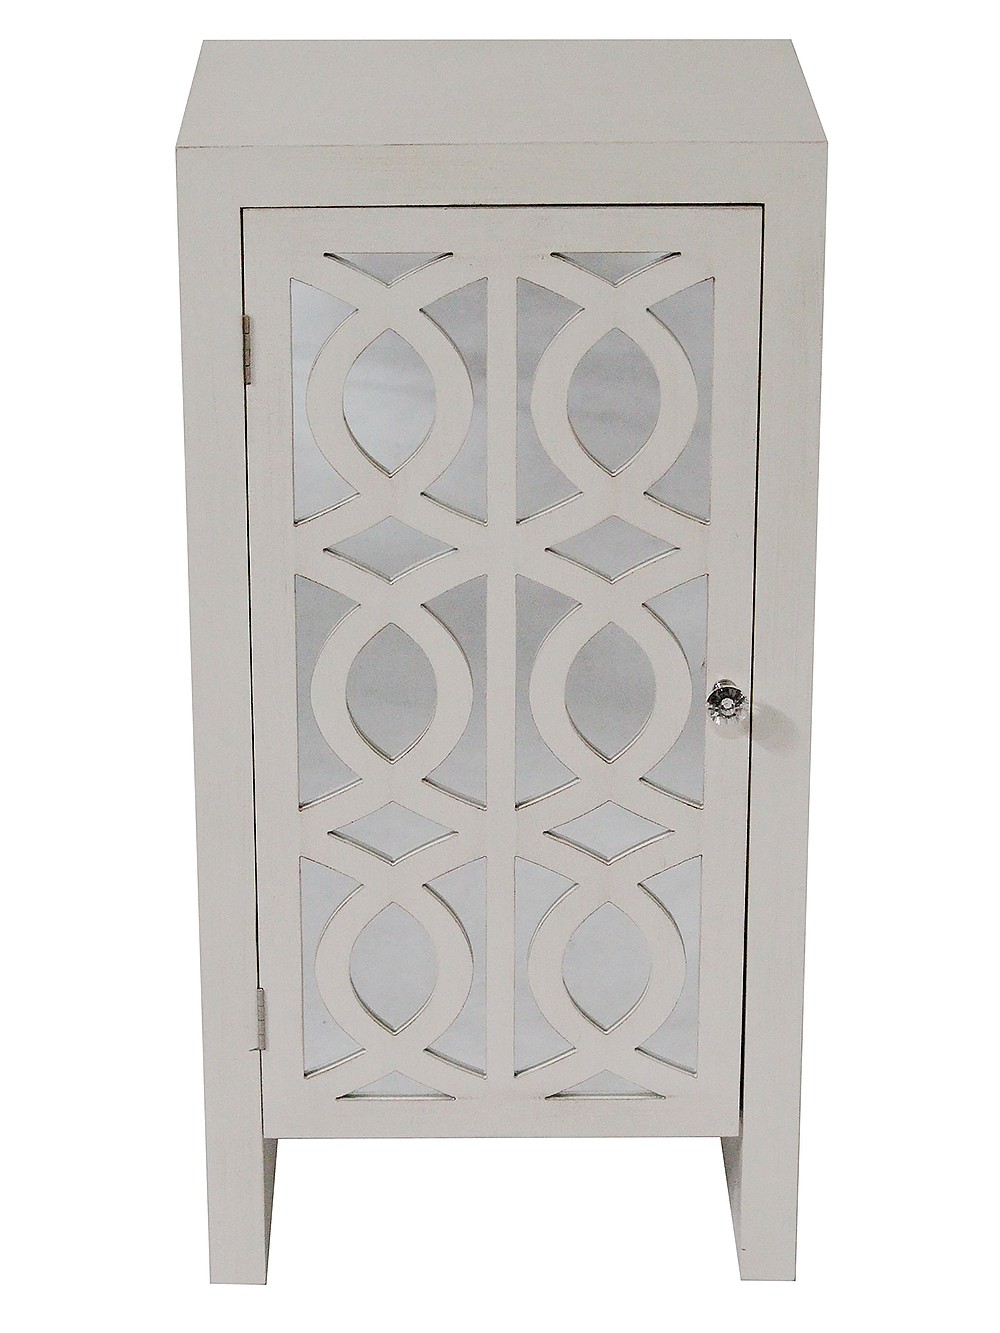 18" X 13" X 36" Antique White MDF Wood Mirrored Glass Accent Cabinet with Mirrored Glass Door